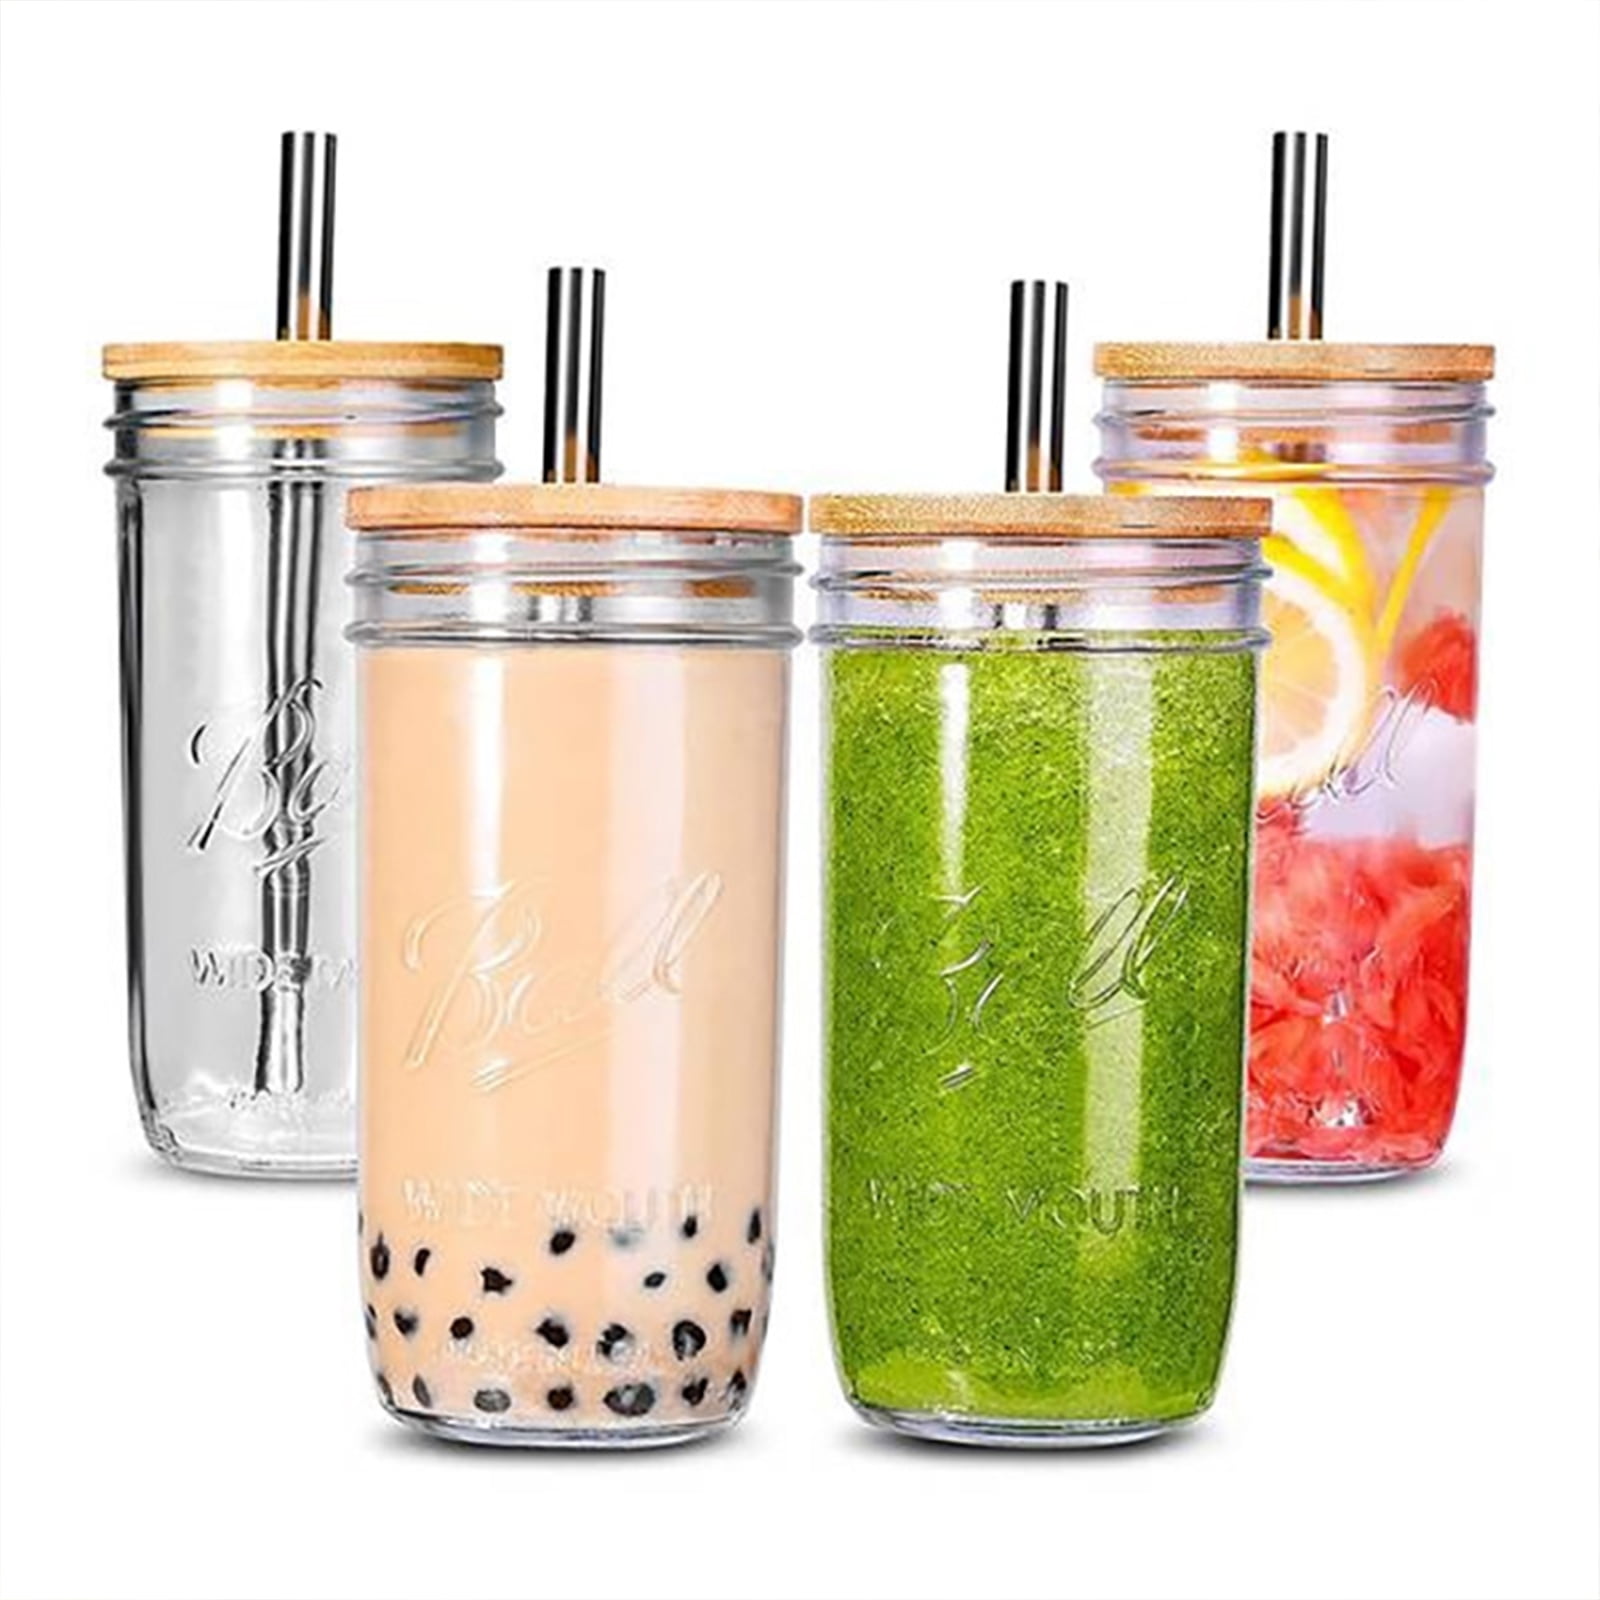 2 Pack Reusable Bubble Tea Cup Bamboo Lid With Bevel Cut Stainless Steel  Straw /eco-friendly Boba Tea Cup Reusable Smoothie Tumbler 